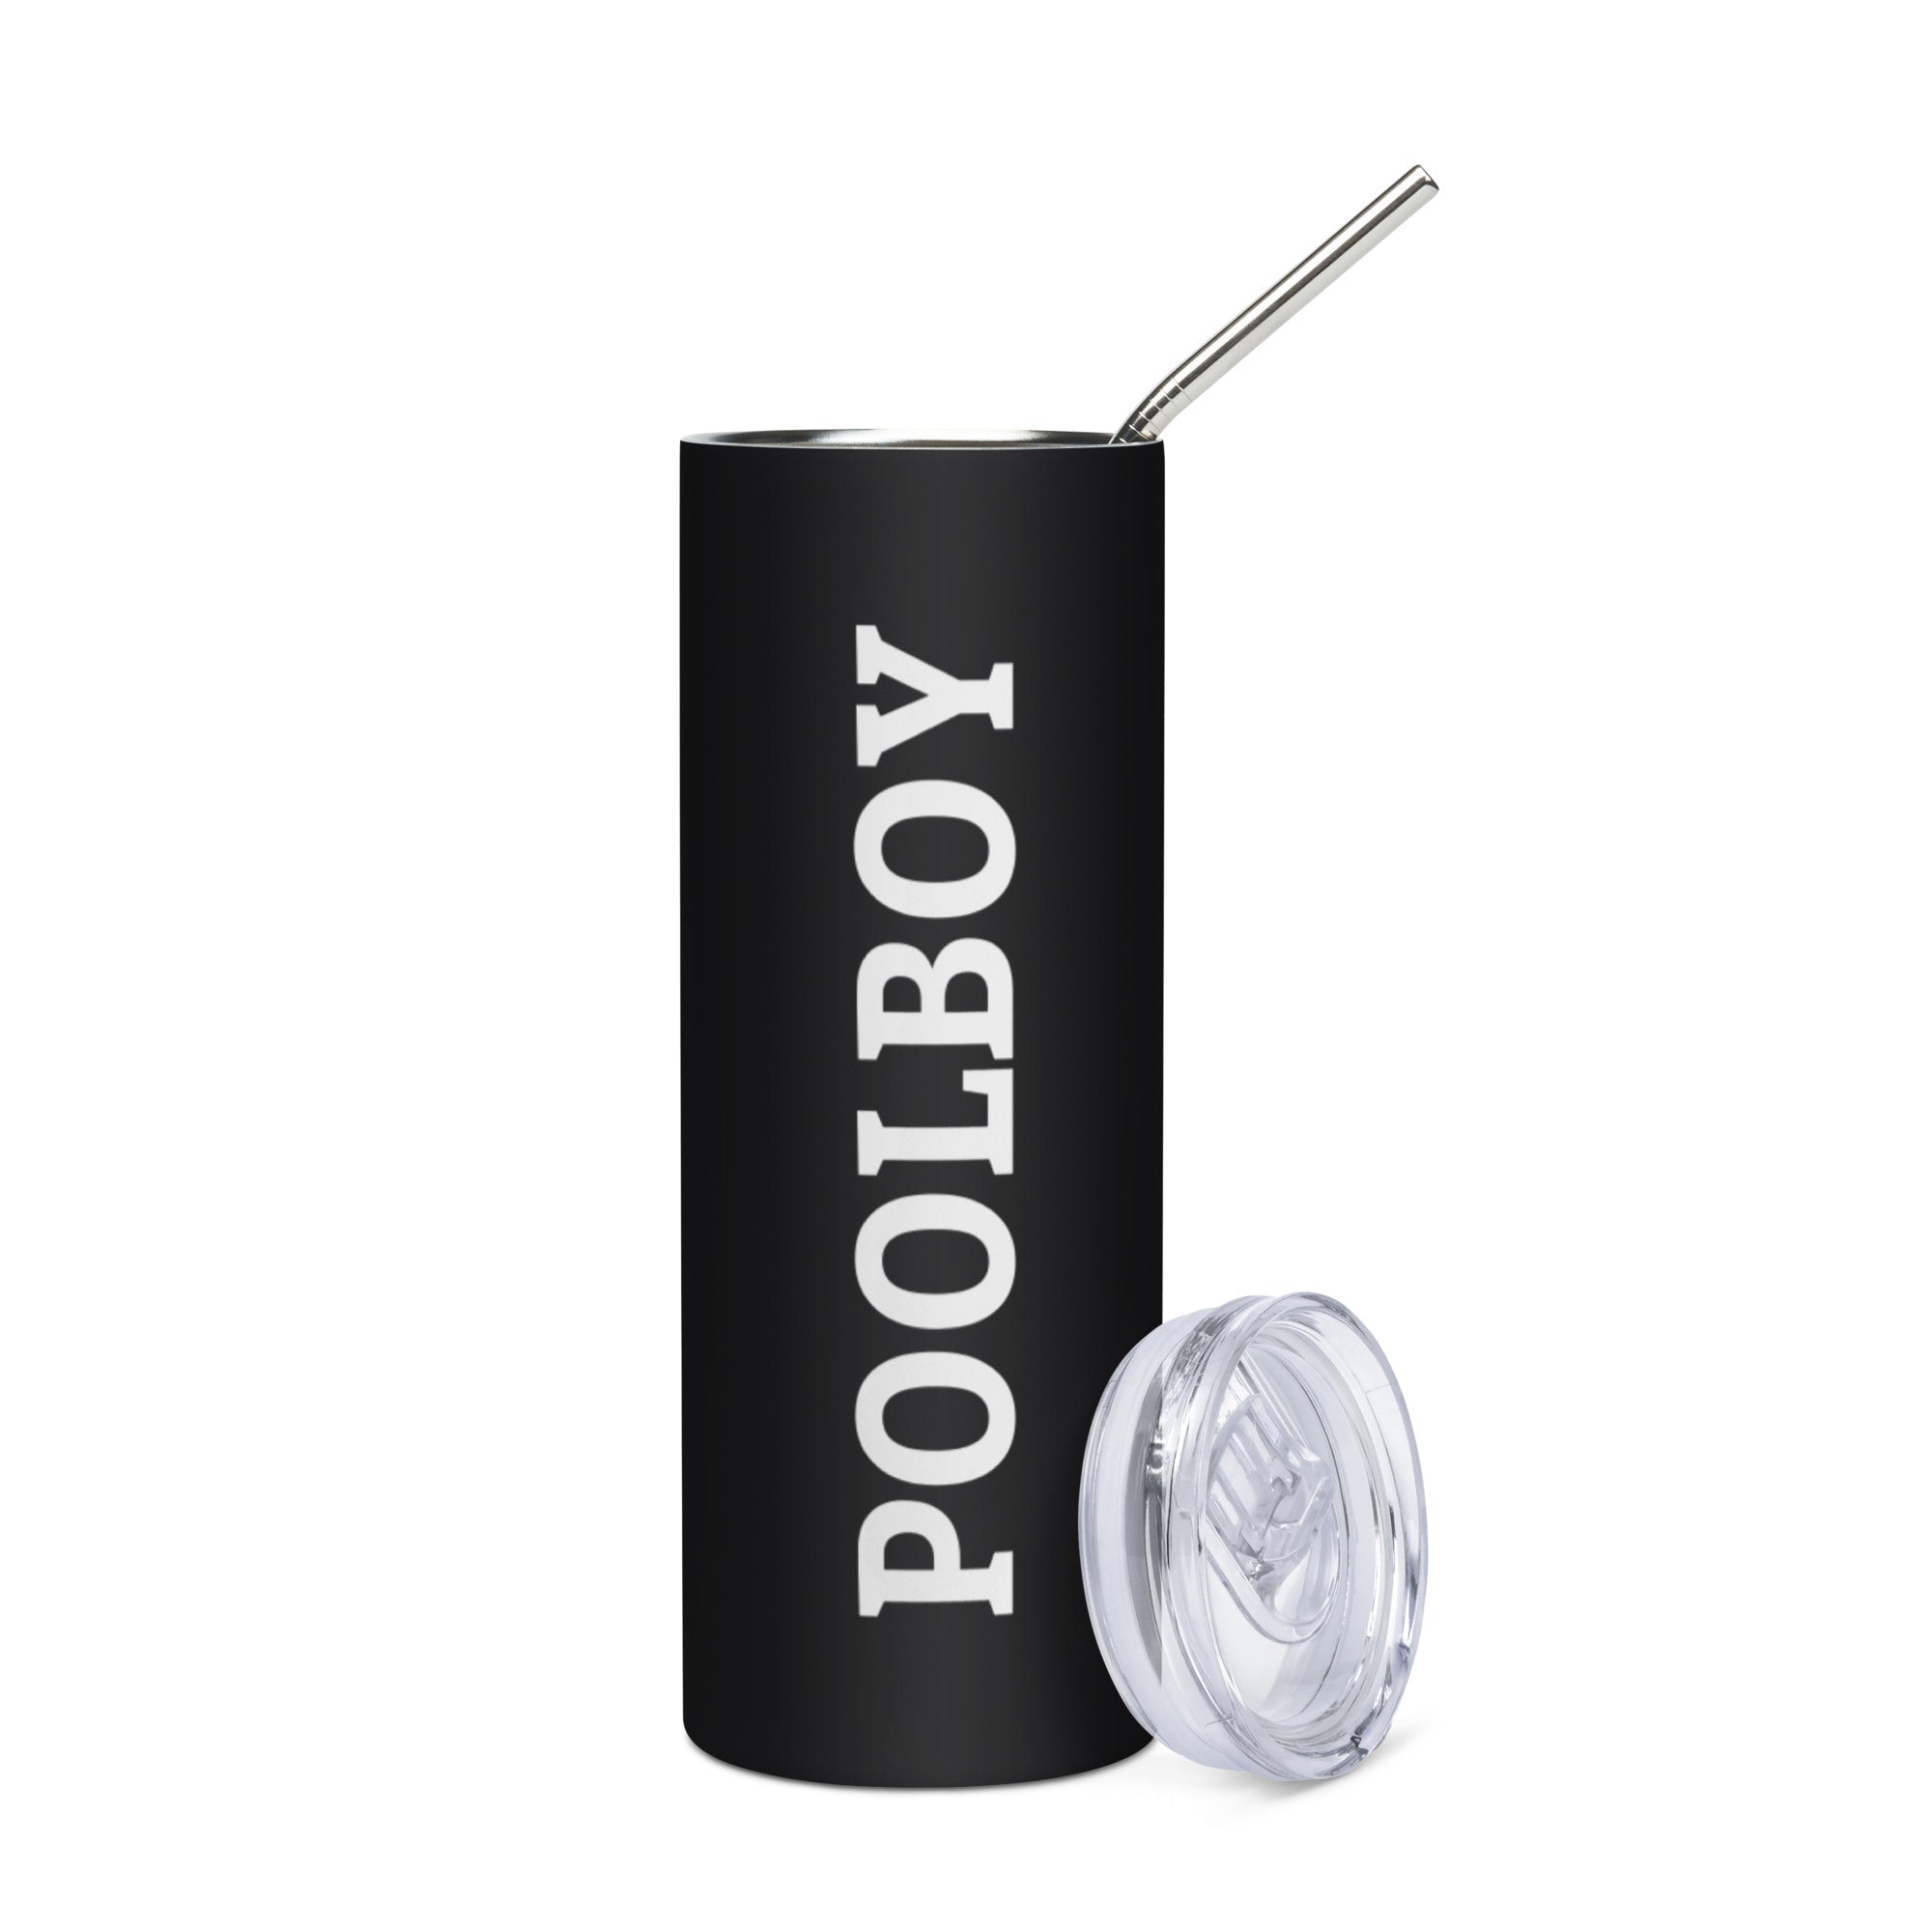 Poolosophy Stainless Steel Tumbler